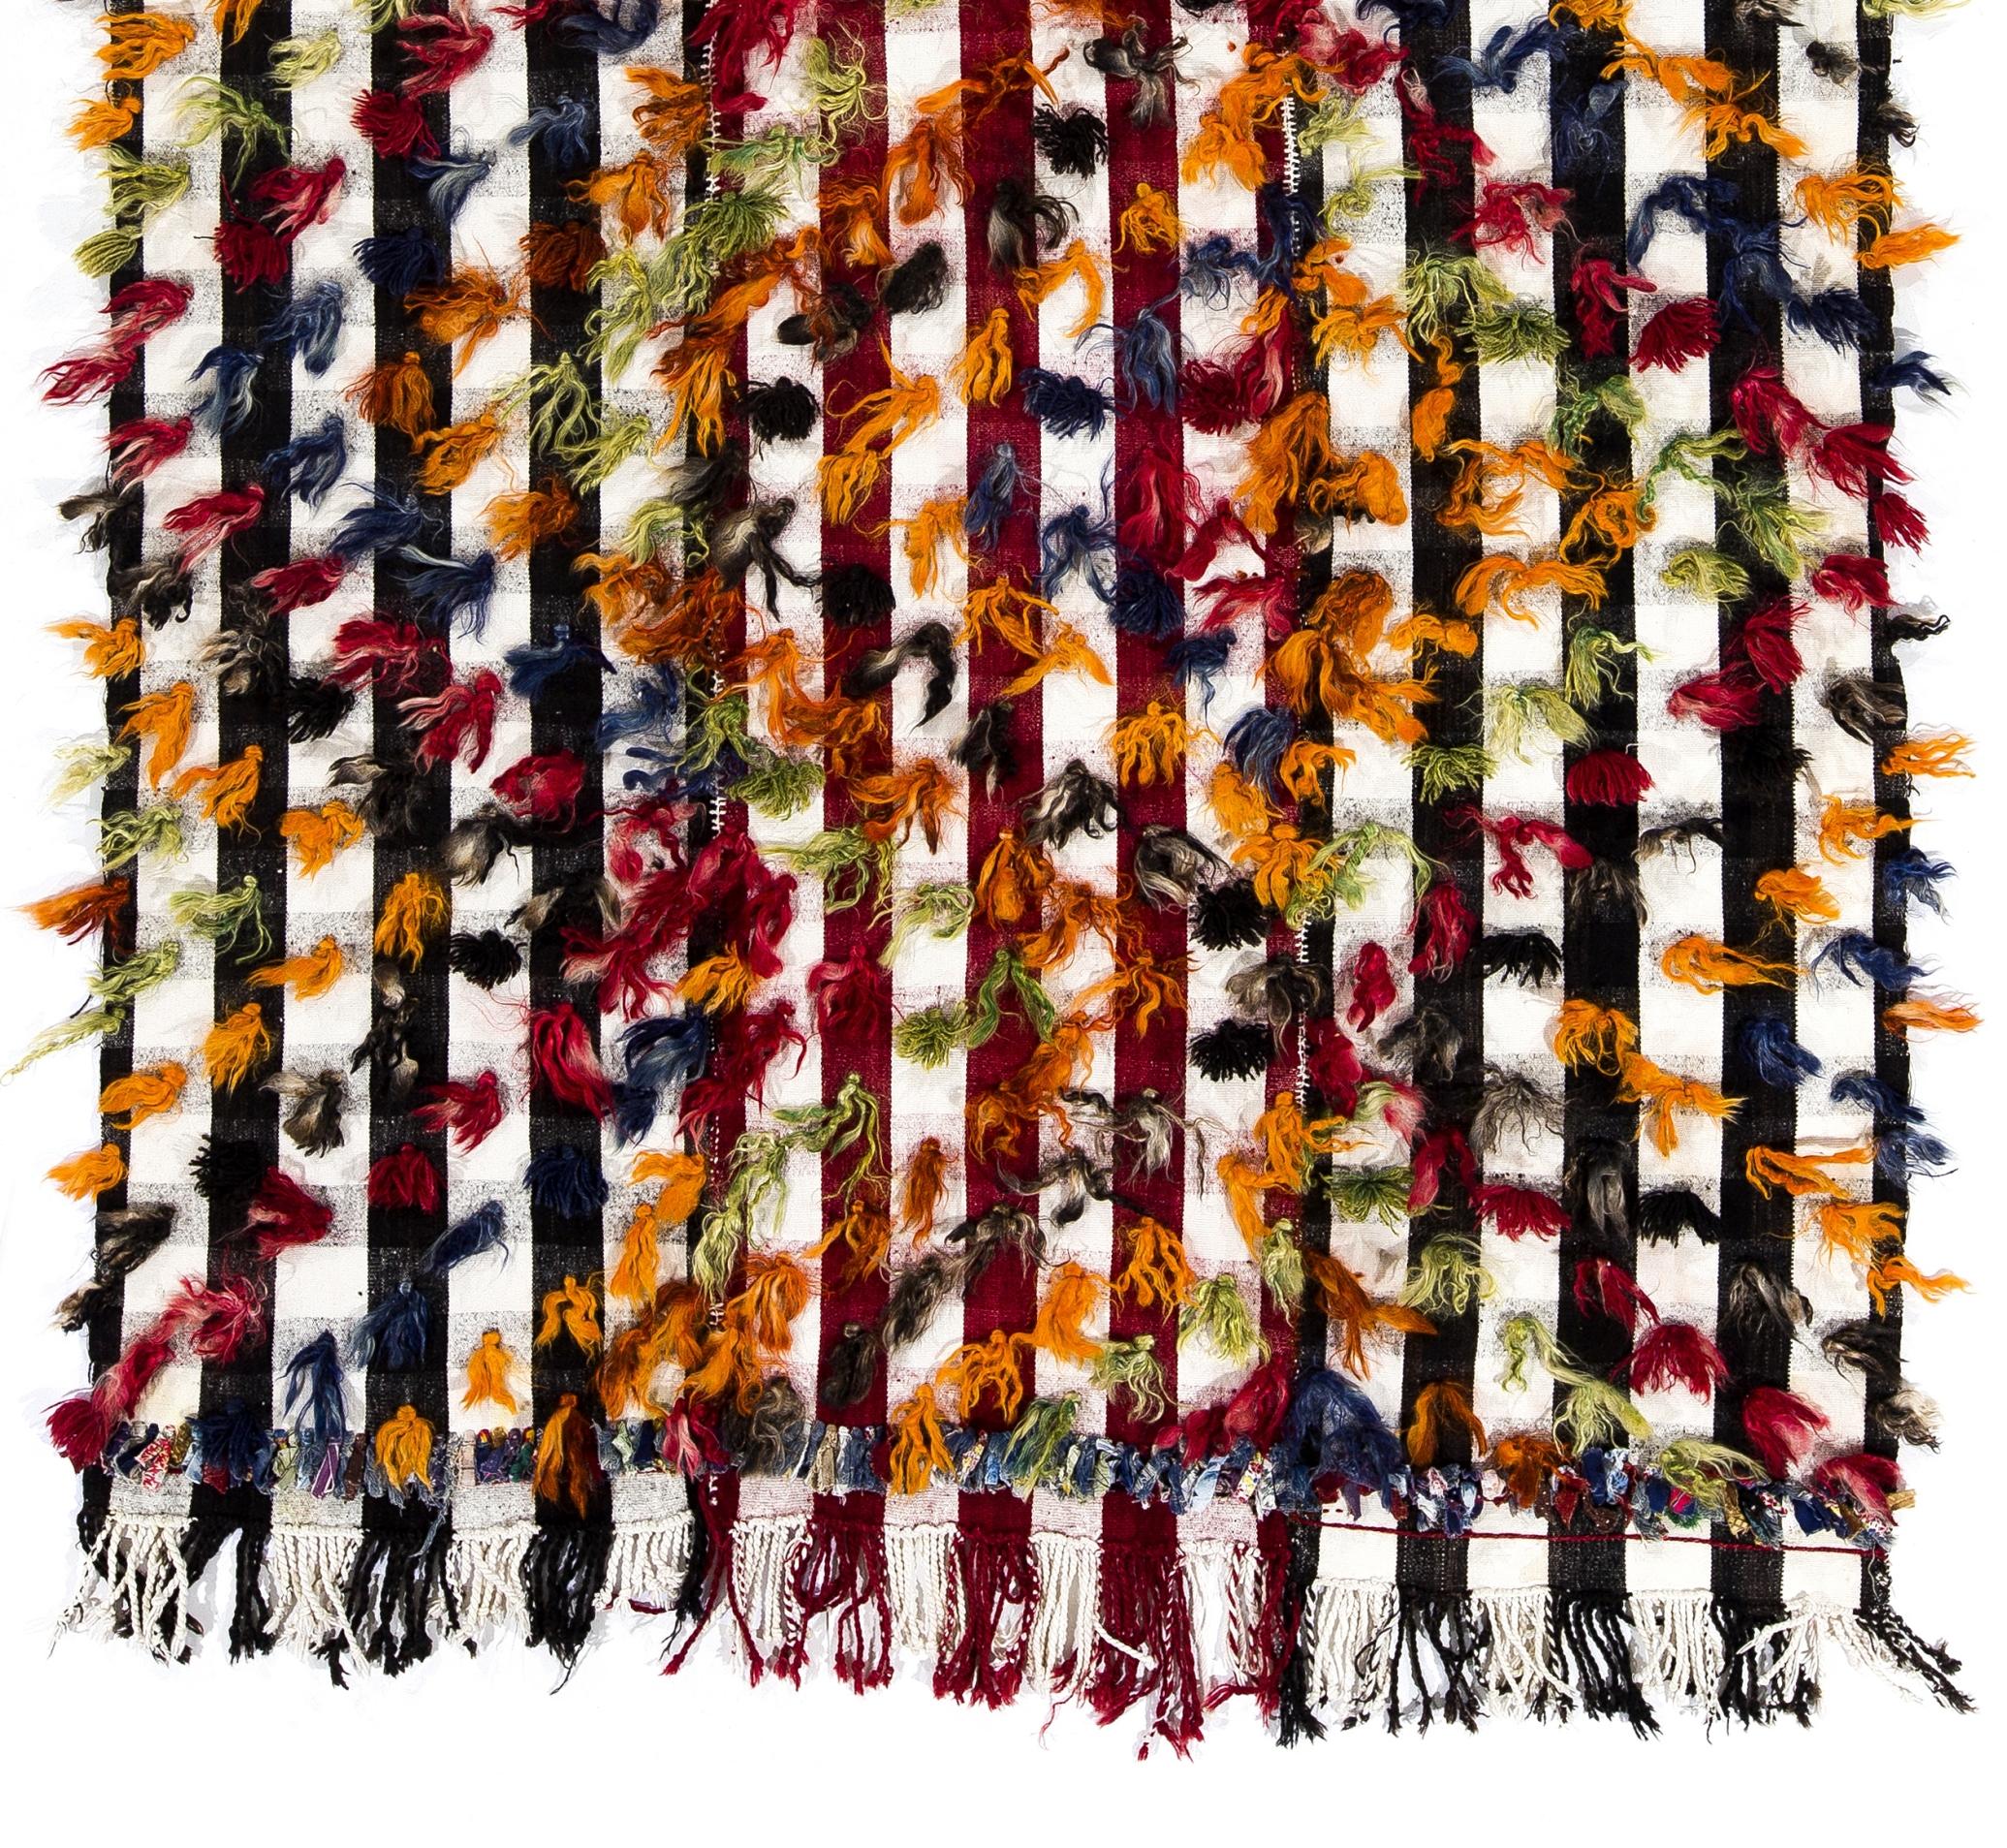 Turkish 4.8x9 ft Banded Tribal Kilim Rug with Colorful Poms. Bed Cover, Wall Hanging For Sale